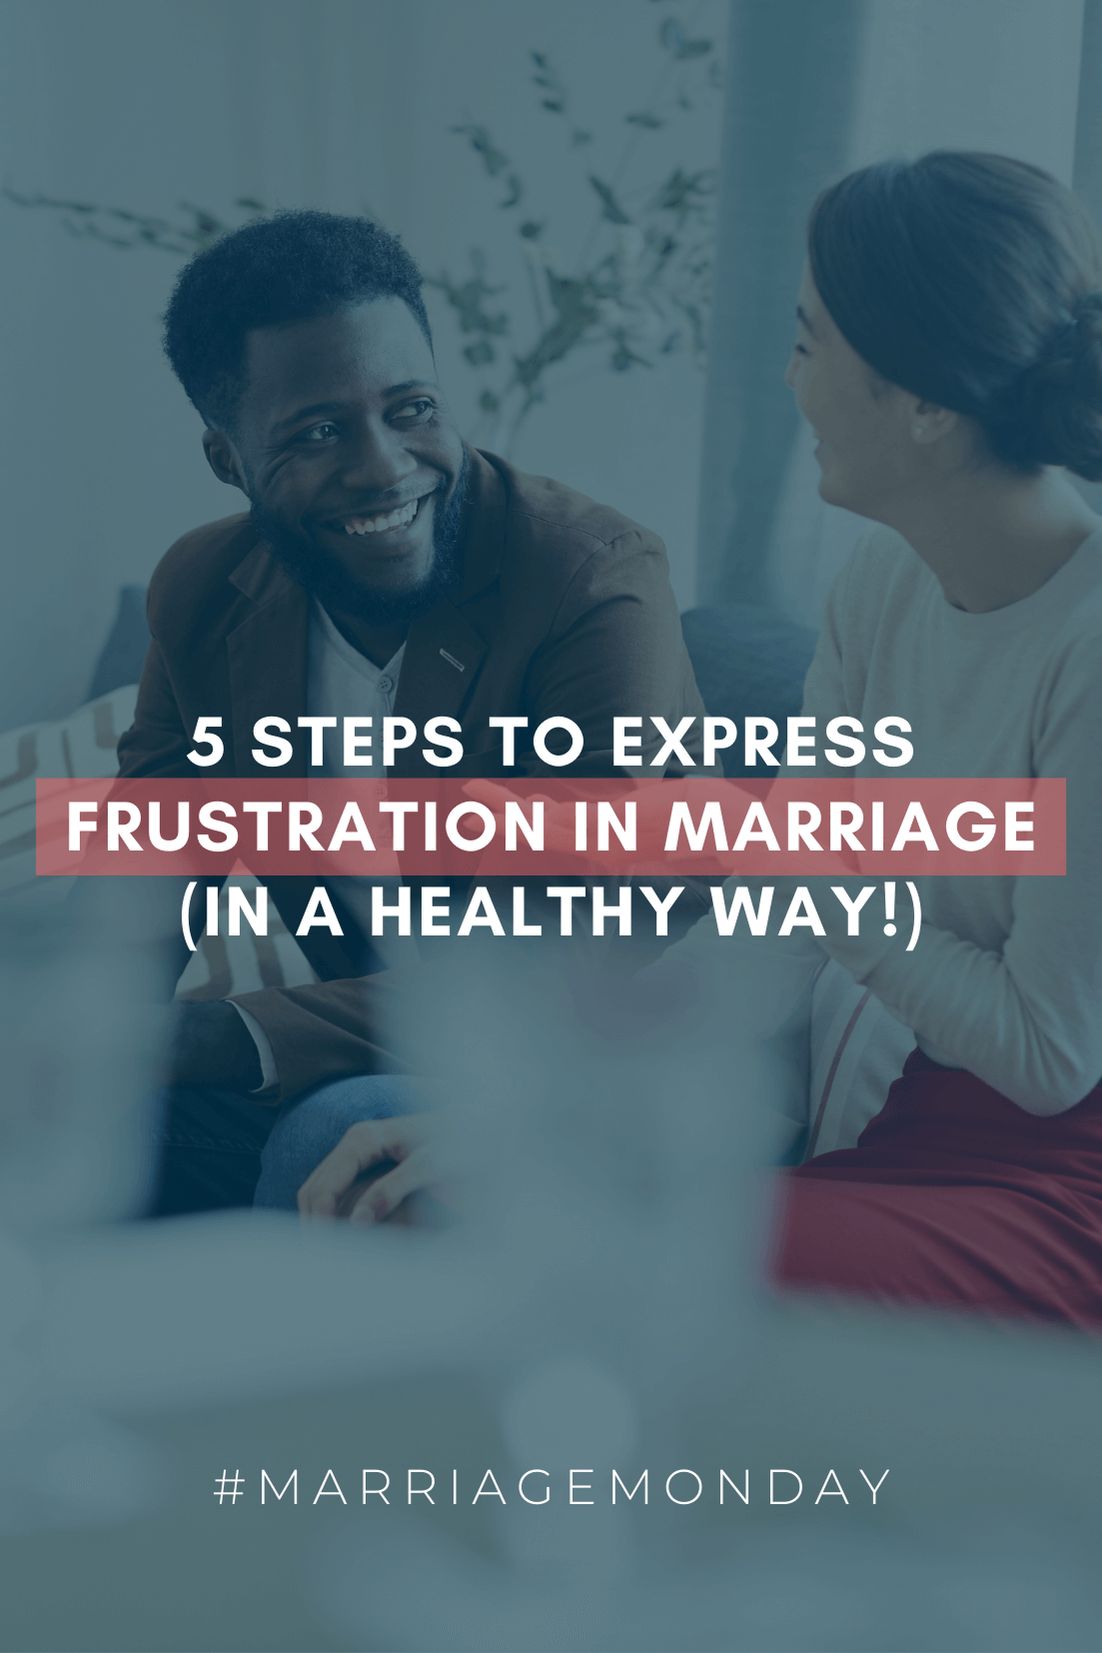 5 Steps to Express Frustration in Your Marriage (in a Healthy Way!) | #MarriageMonday